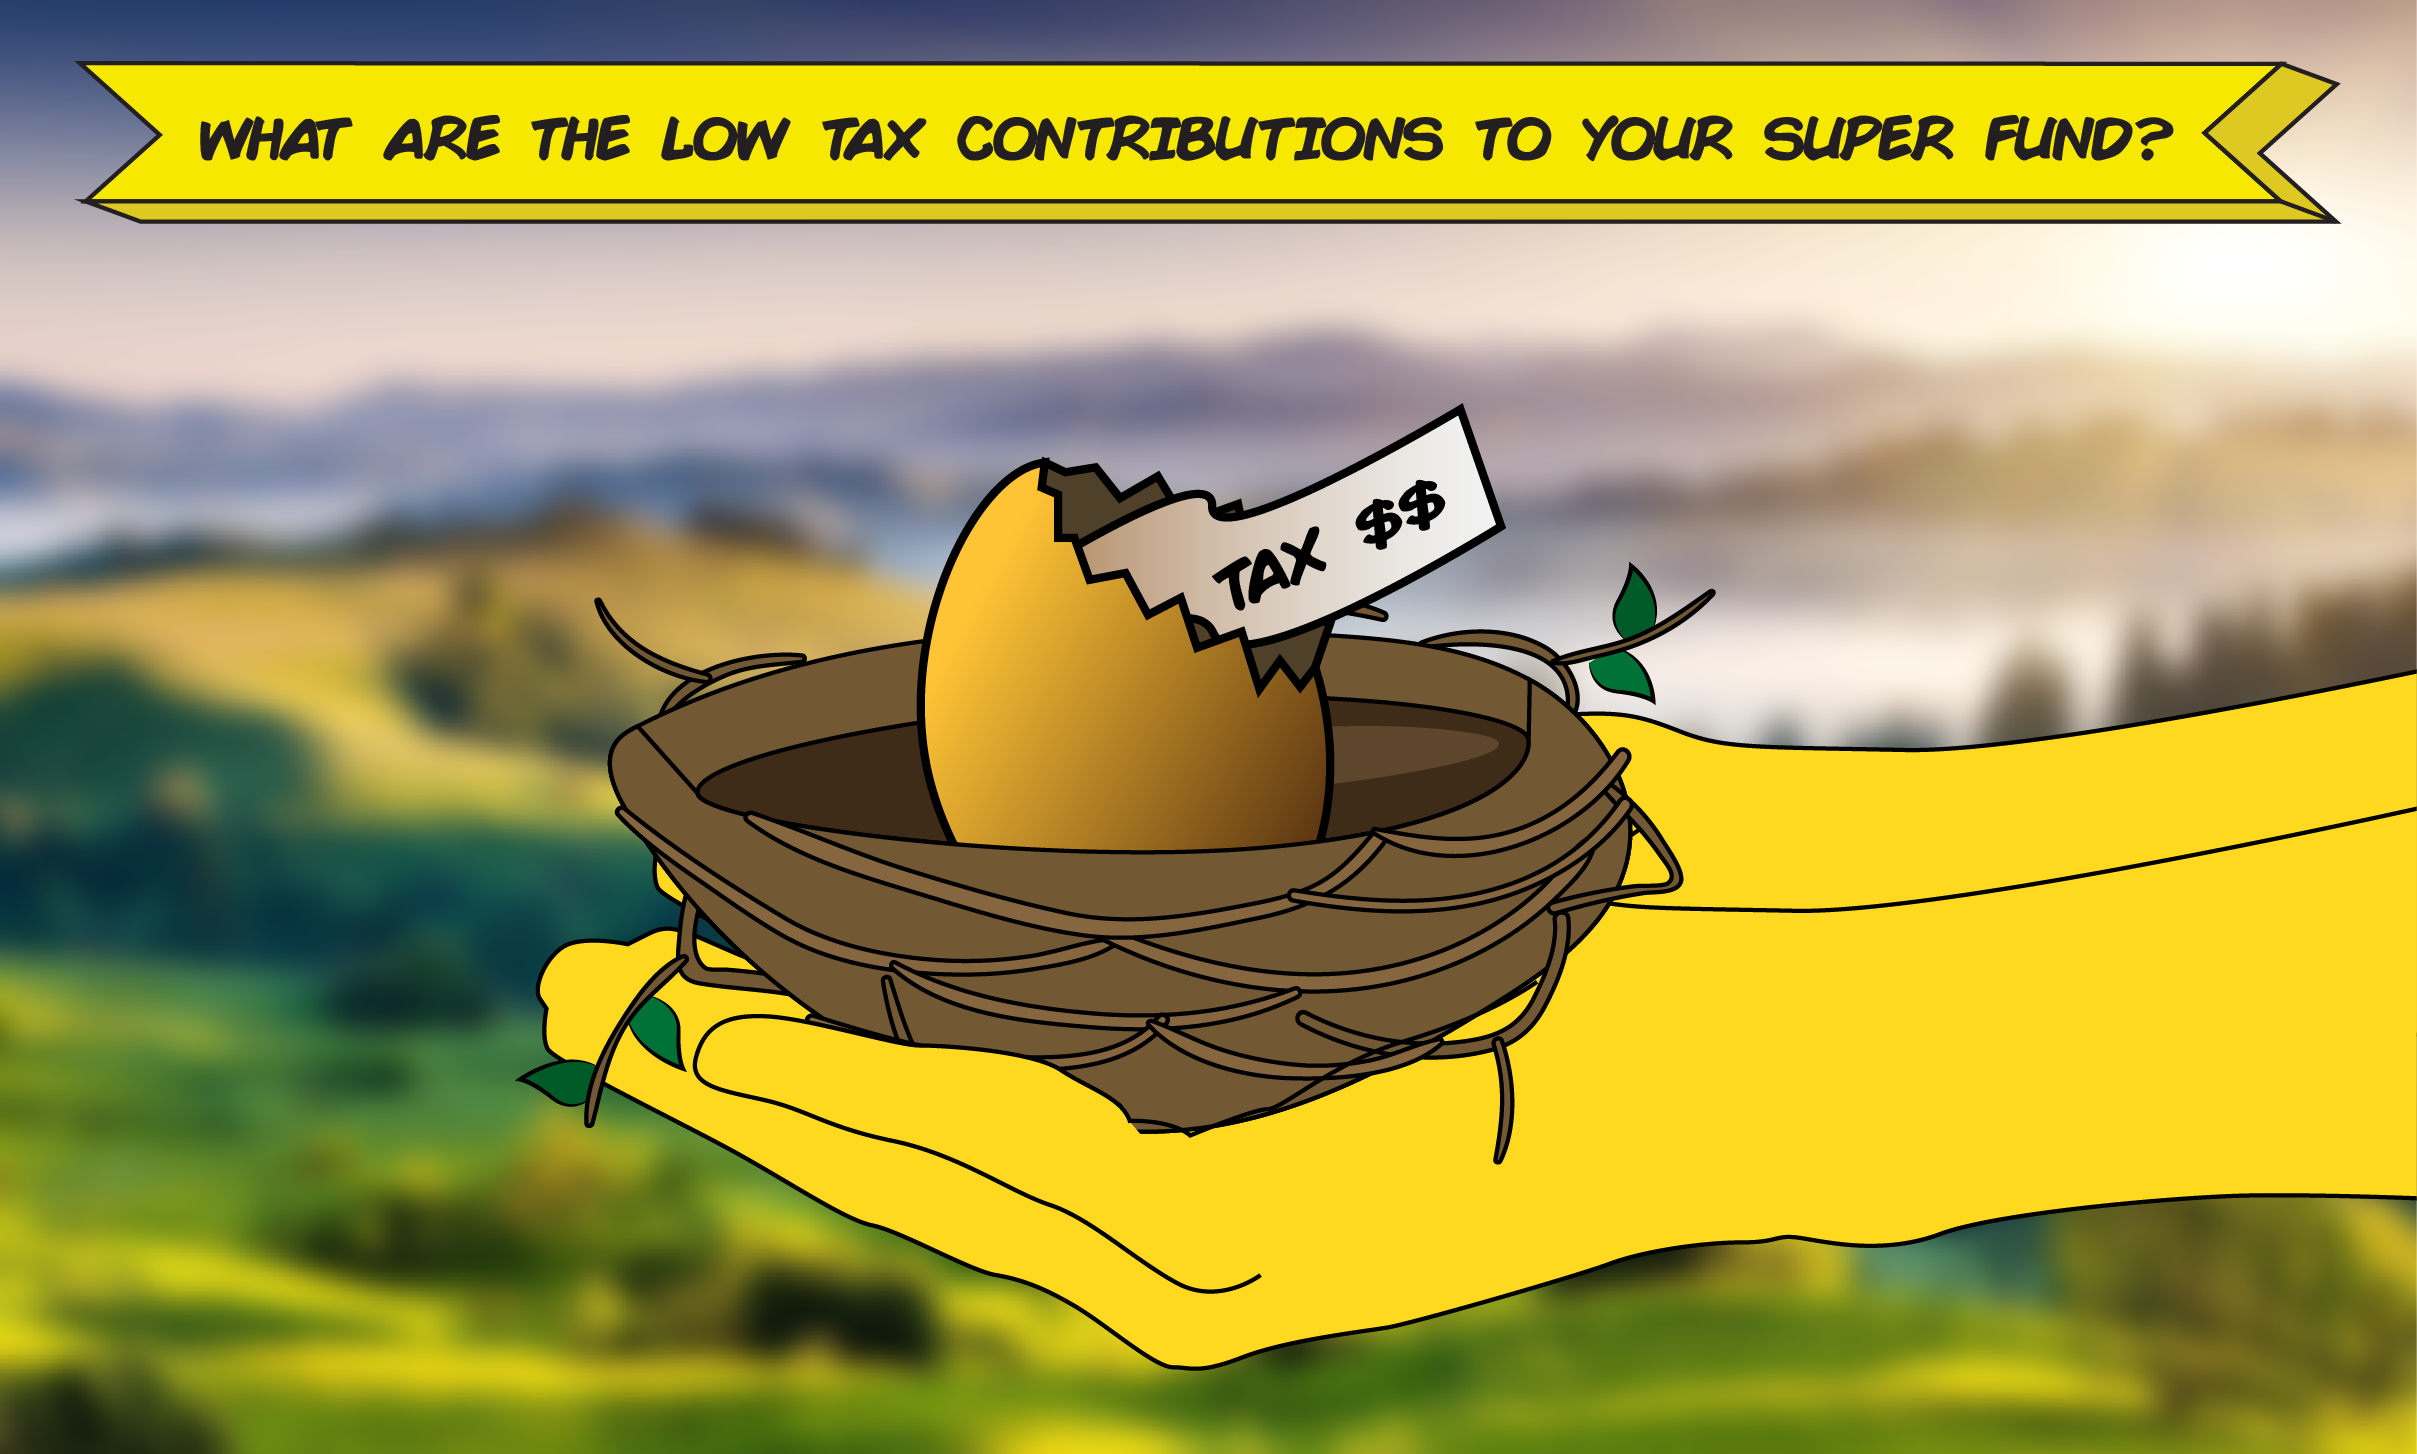 Low tax contributions to super are generally taxed within your super fund.